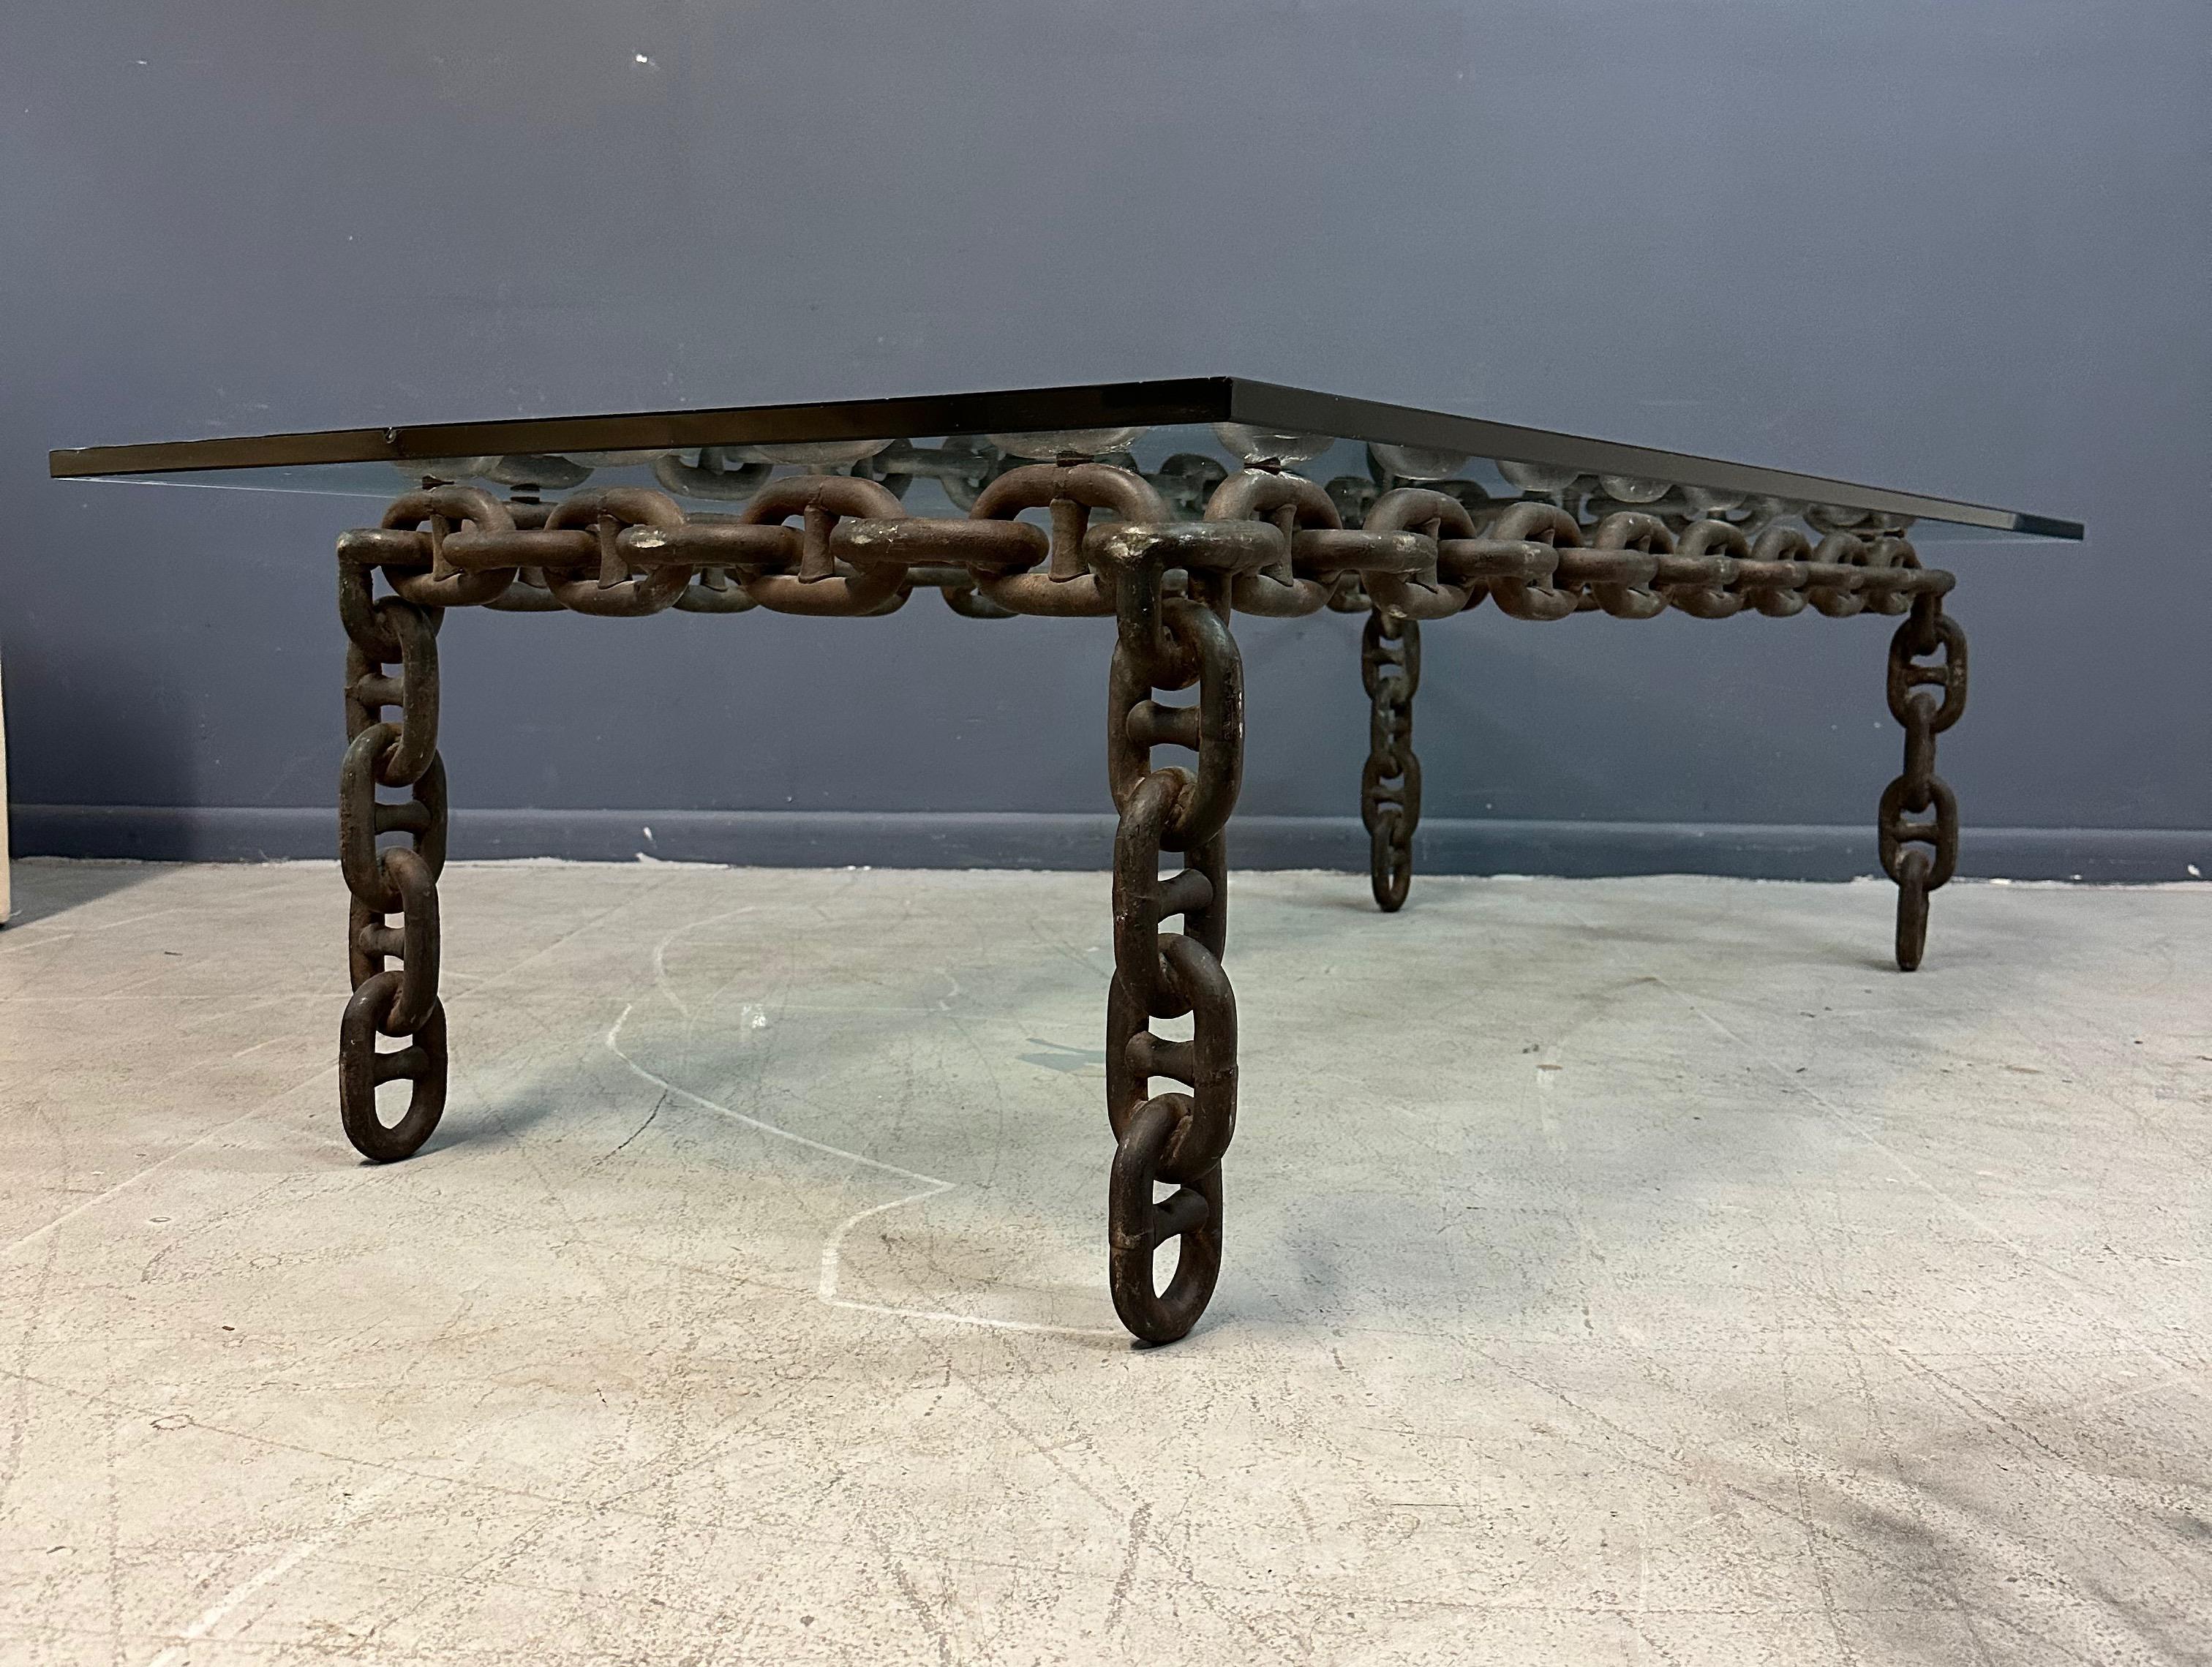 Awesome industrial style coffee table that legend says was used in the John Varvatos boutique in SoHo NYC. We have placed a large glass that overhangs the chain link, but if you prefer we can cut a new top that fits into the chain. This table would